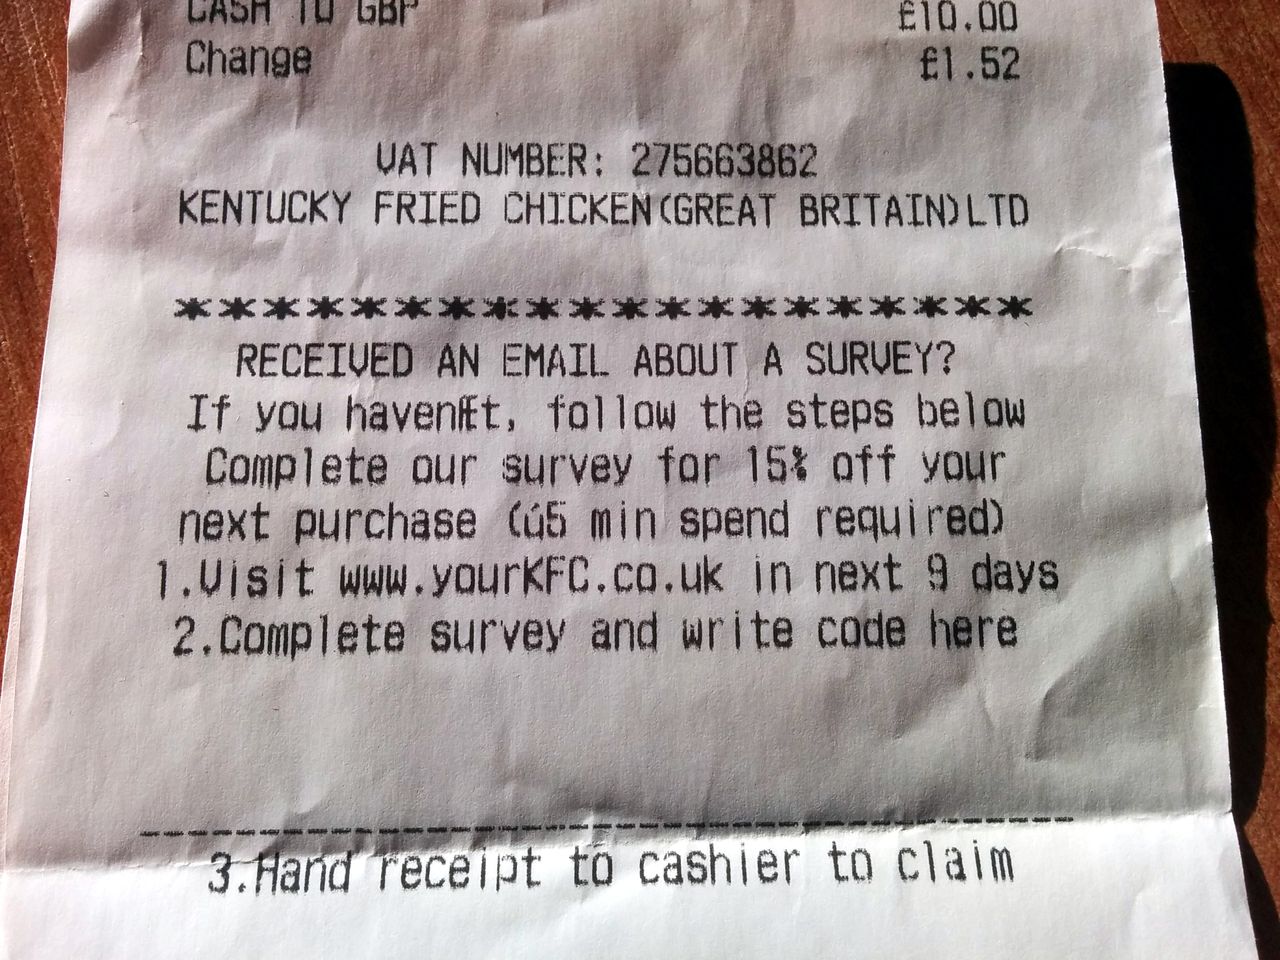 A receipt showing garbled characters for the £-sign and an apostrophe